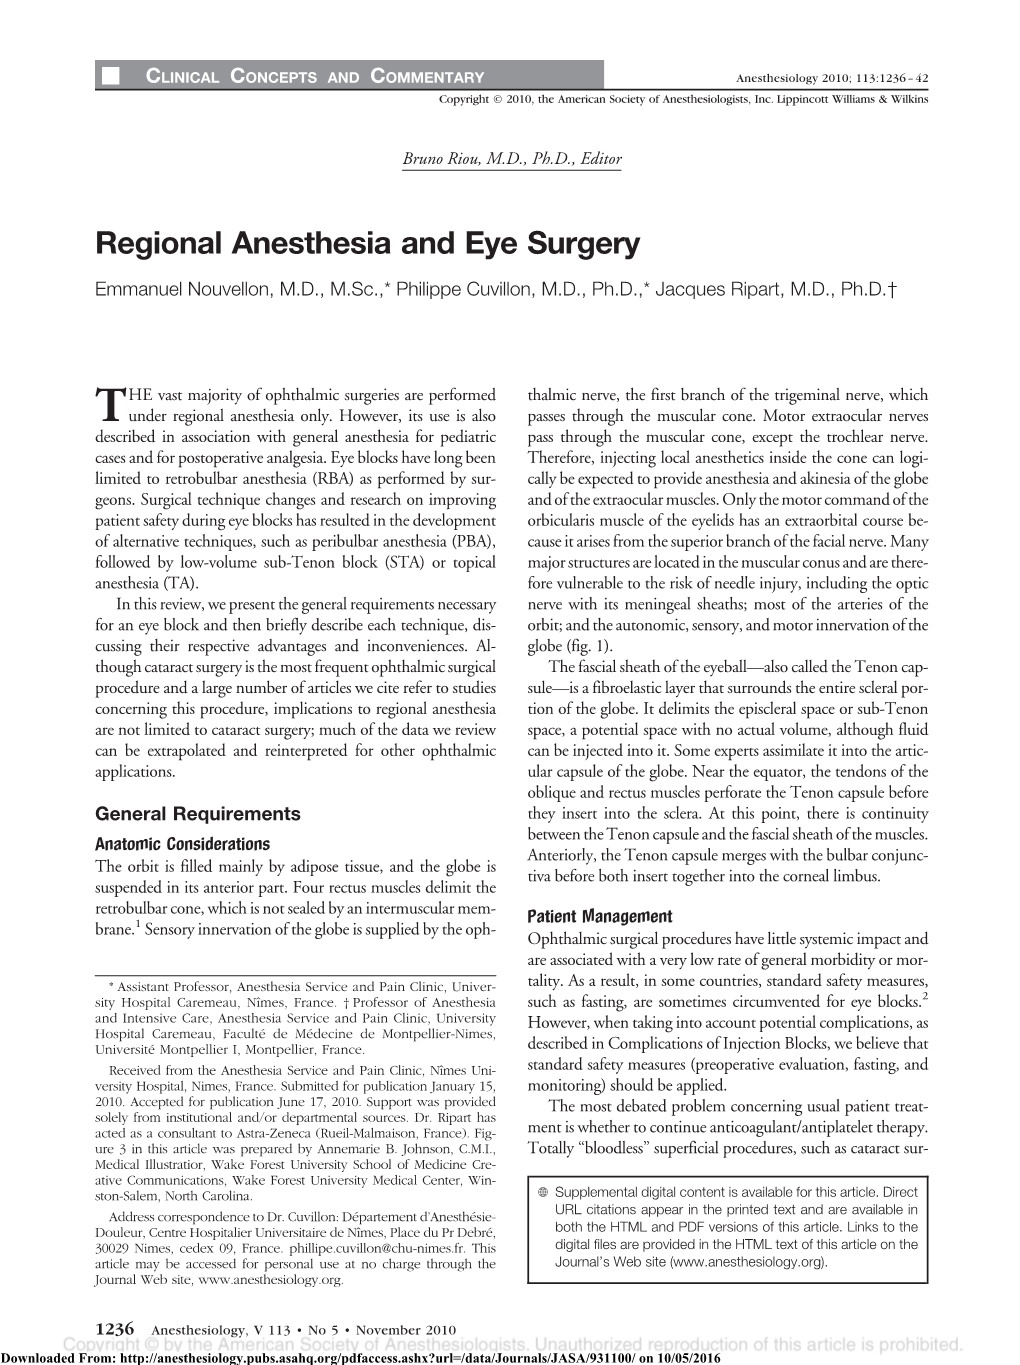 Regional Anesthesia and Eye Surgery